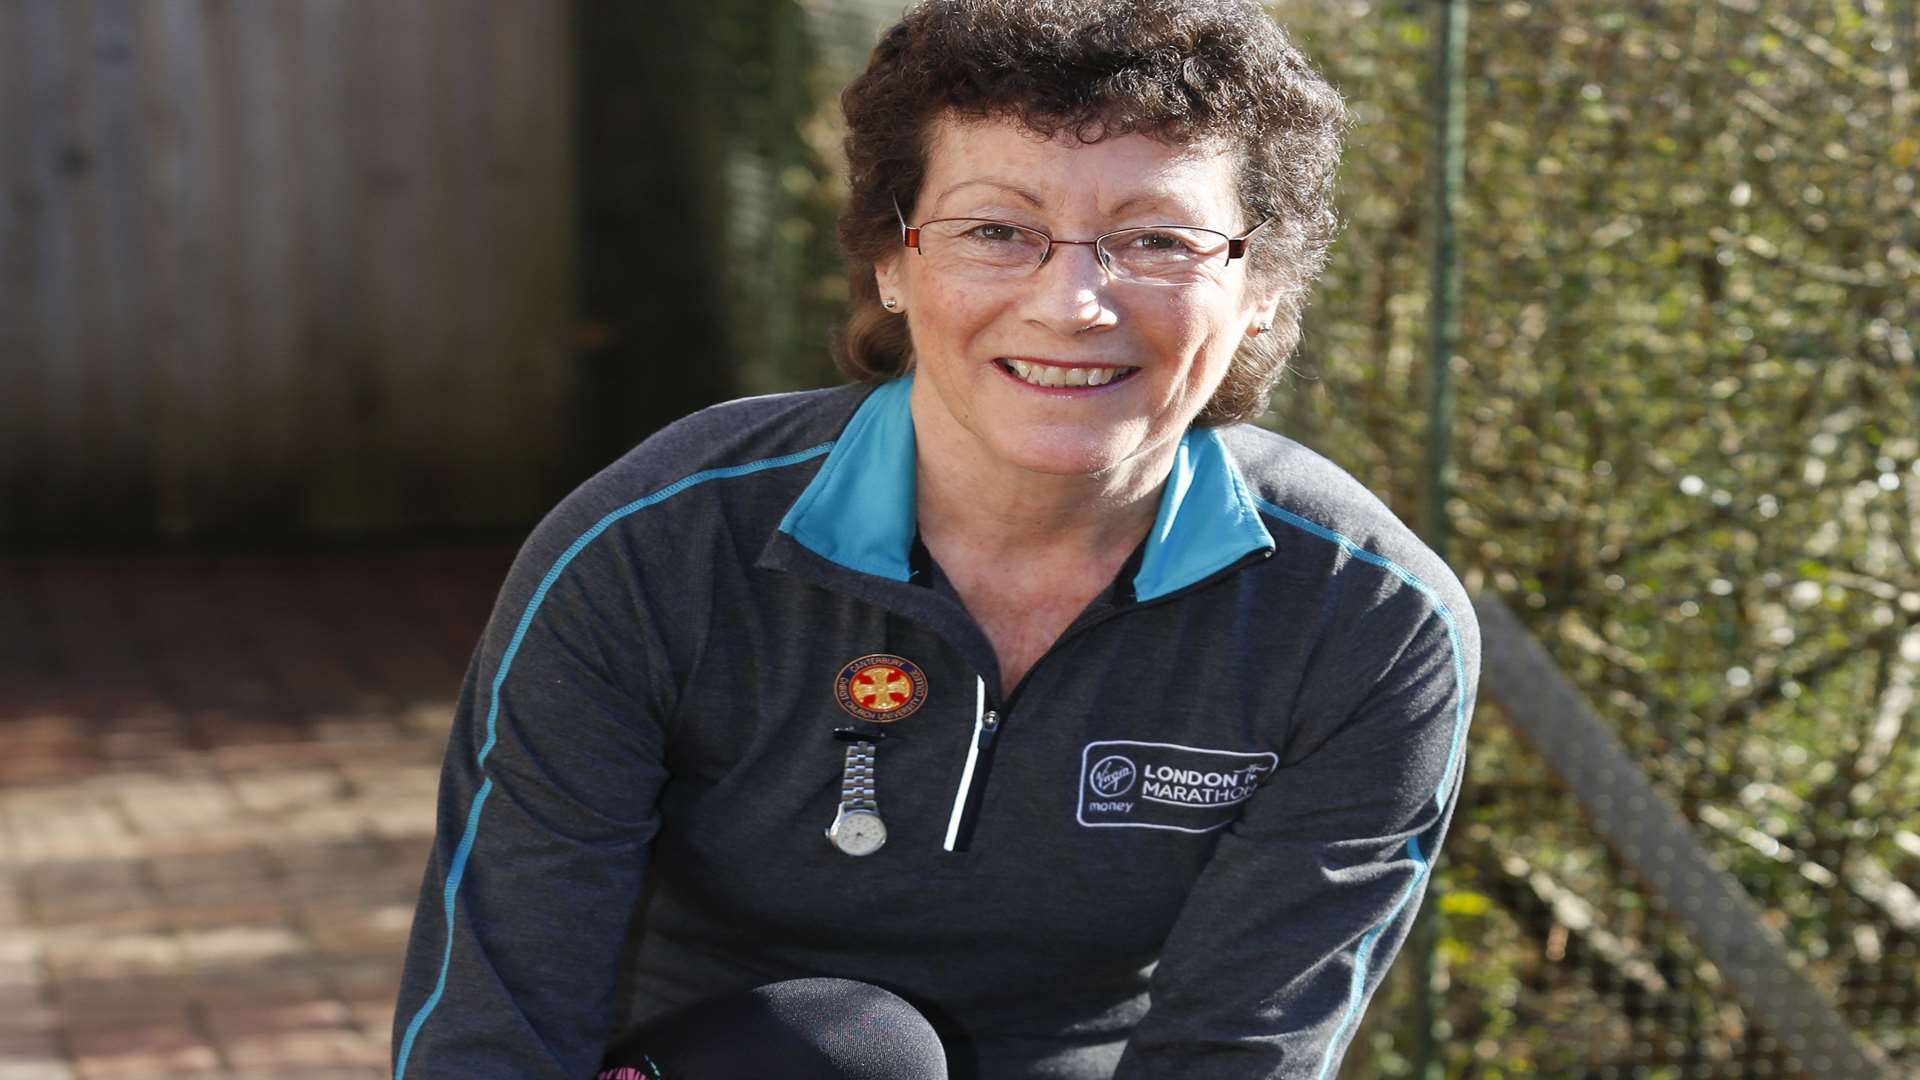 Gina Crocker is running the London Marathon to mark 60th birthday and retirement from nursing after 42 years